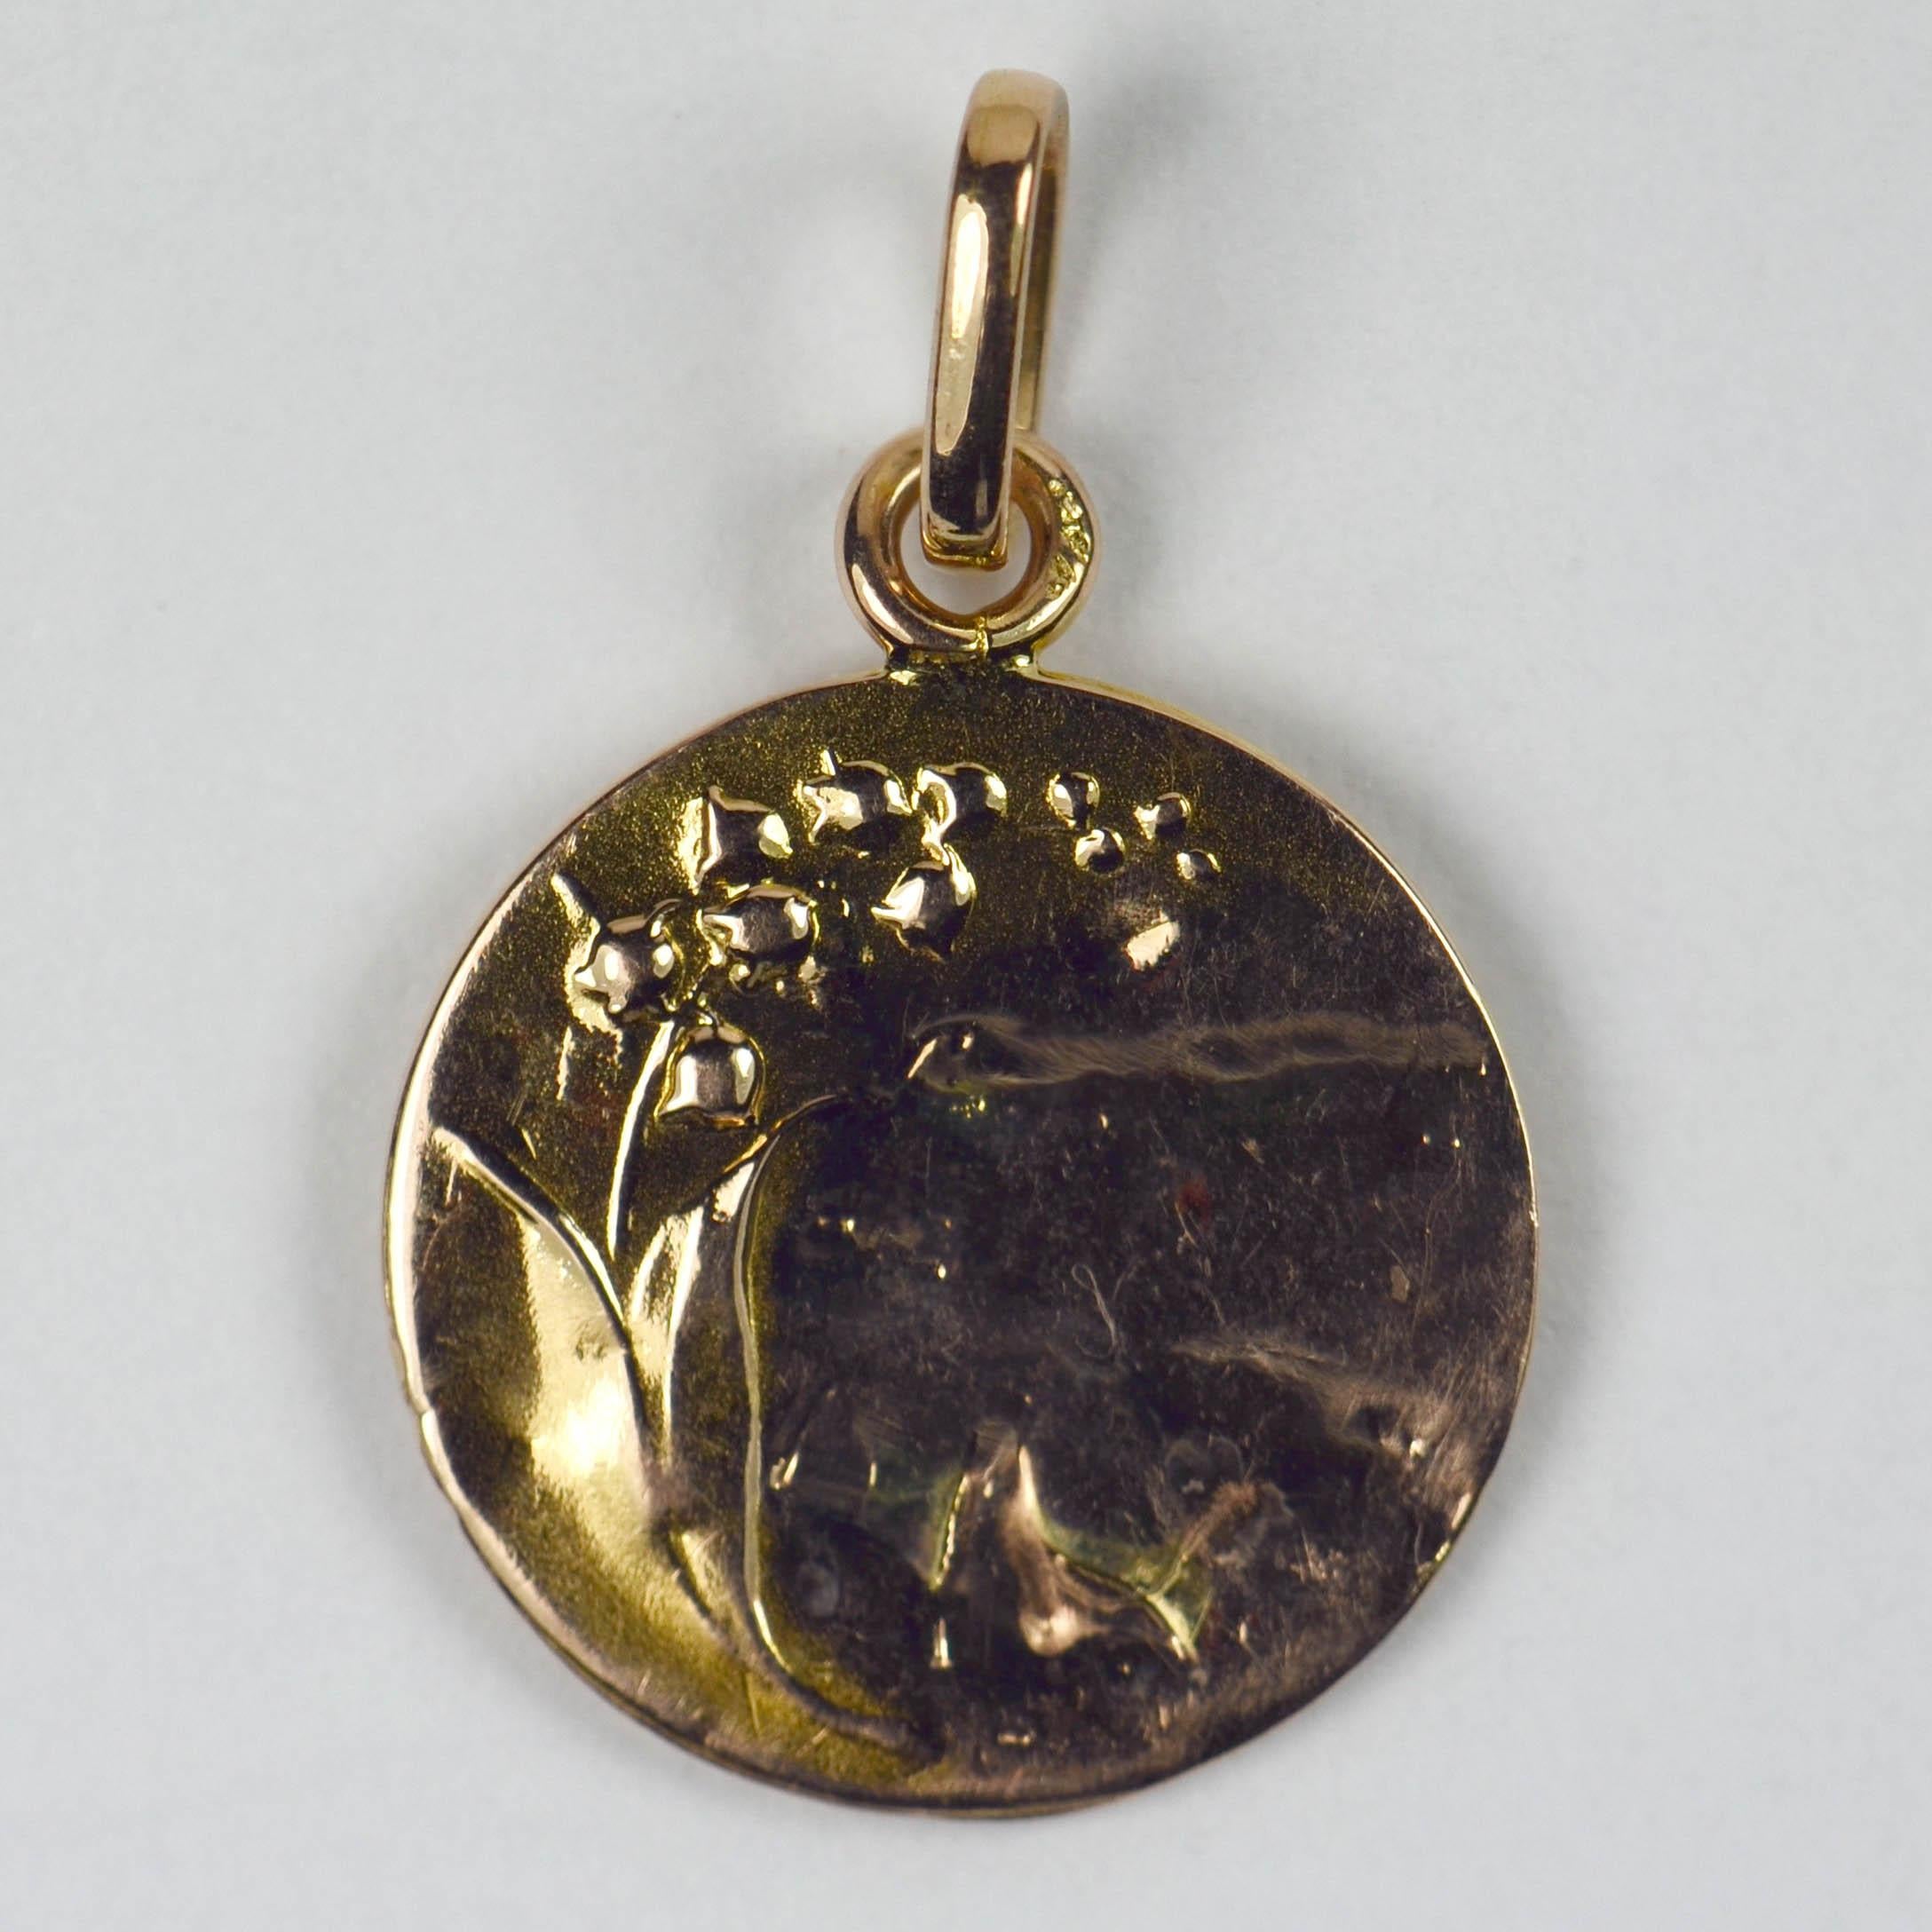 A French 18 karat (18K) yellow gold charm pendant designed as a medal depicting the Virgin Mary to one side, with a lily of the valley to the reverse. Marked ‘Virgo Maria’ and signed E. Dropsy. Stamped with the French eagle’s head for 18 karat